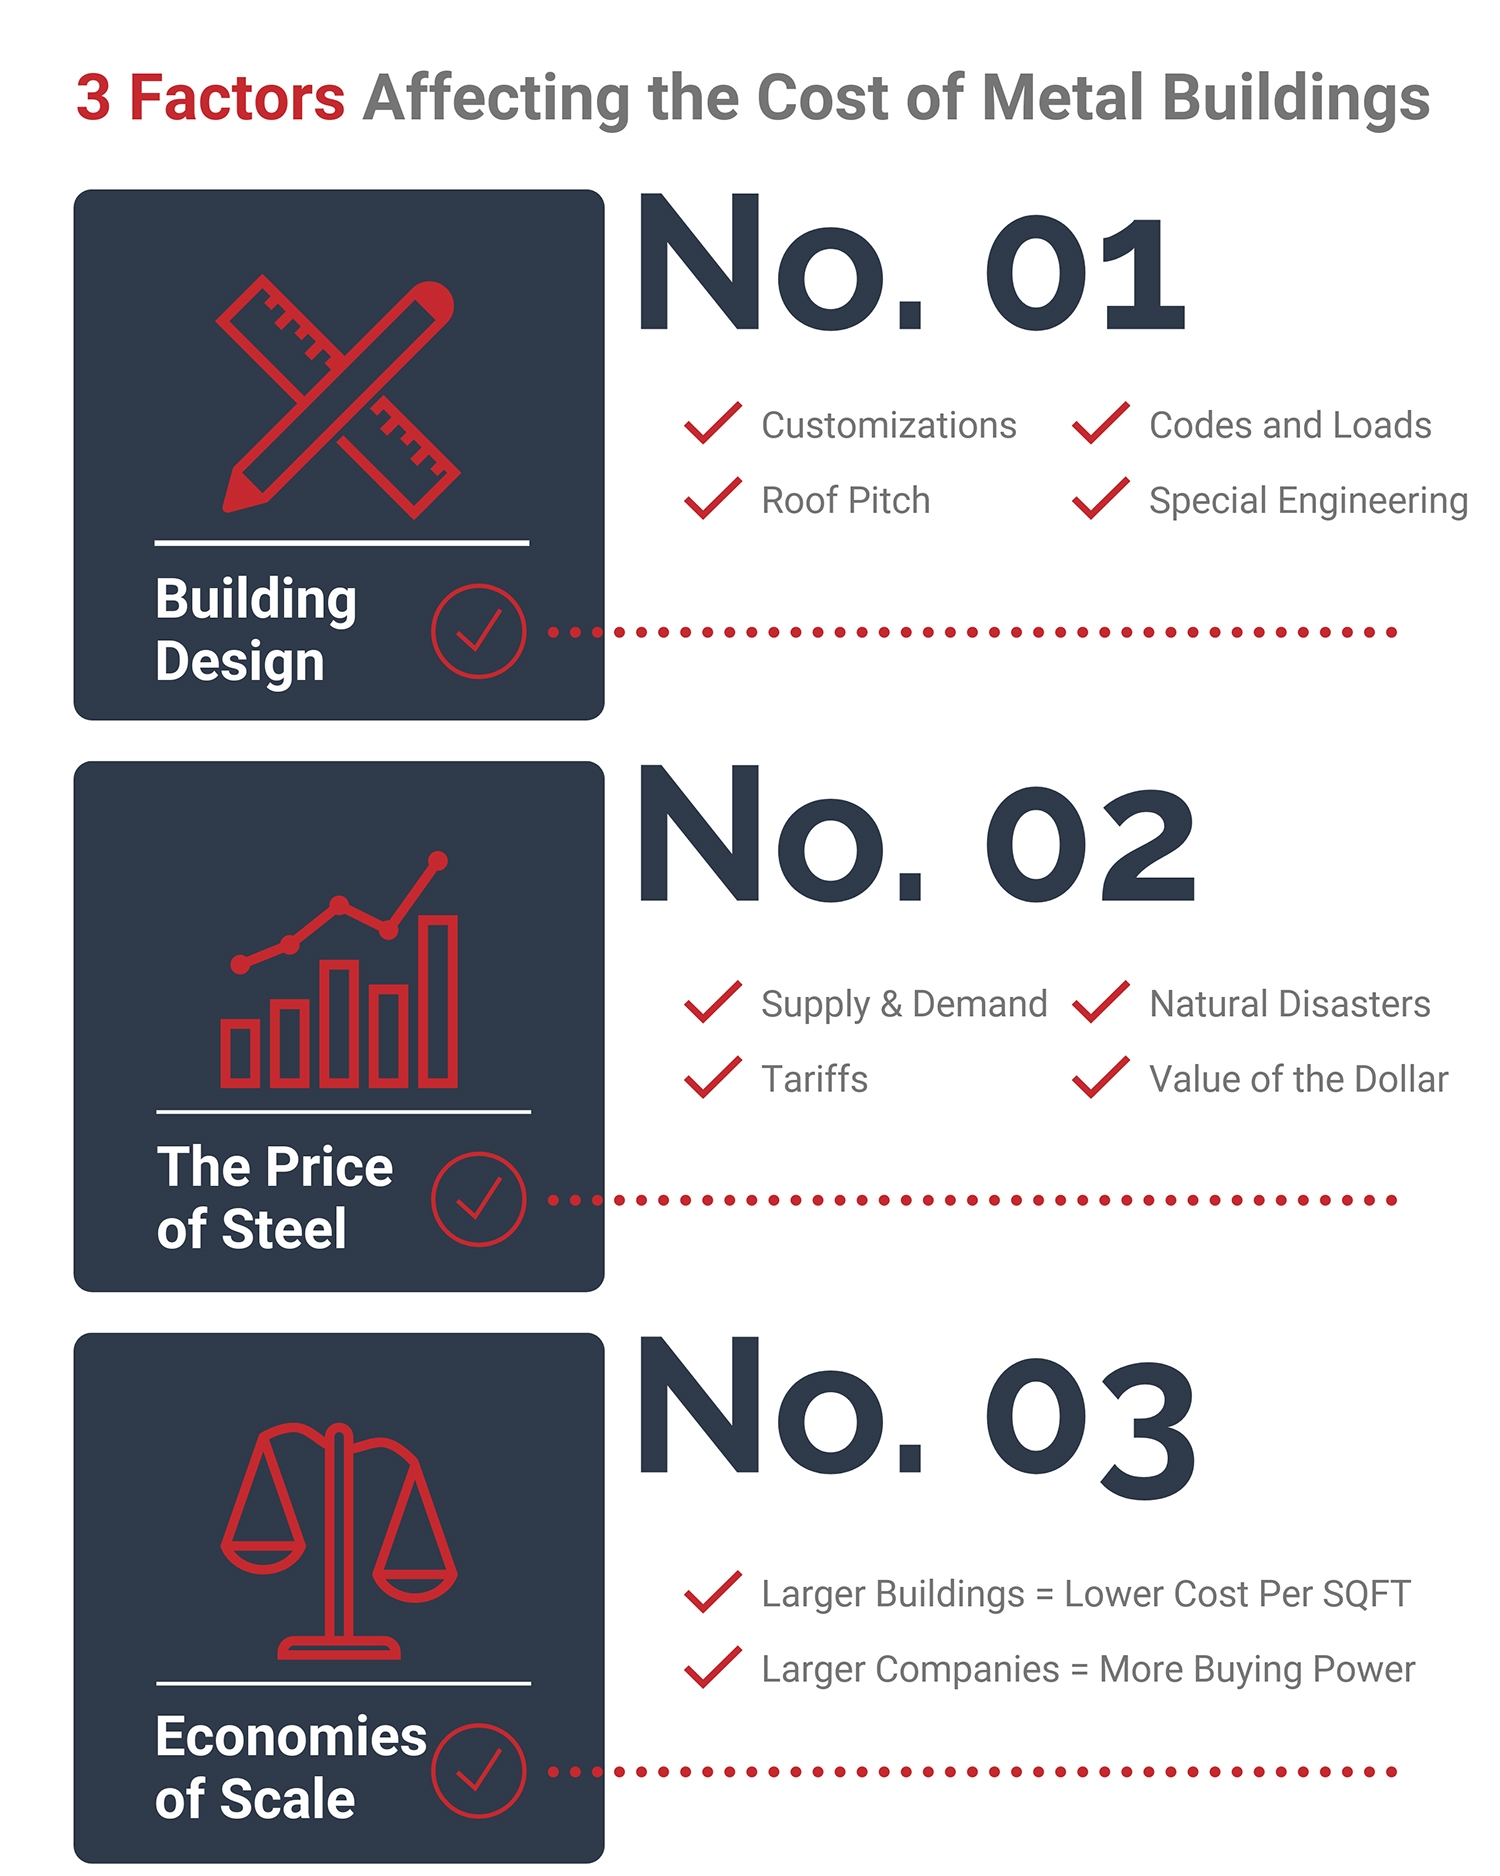 3 Factors Affecting the Cost of Metal Buildings